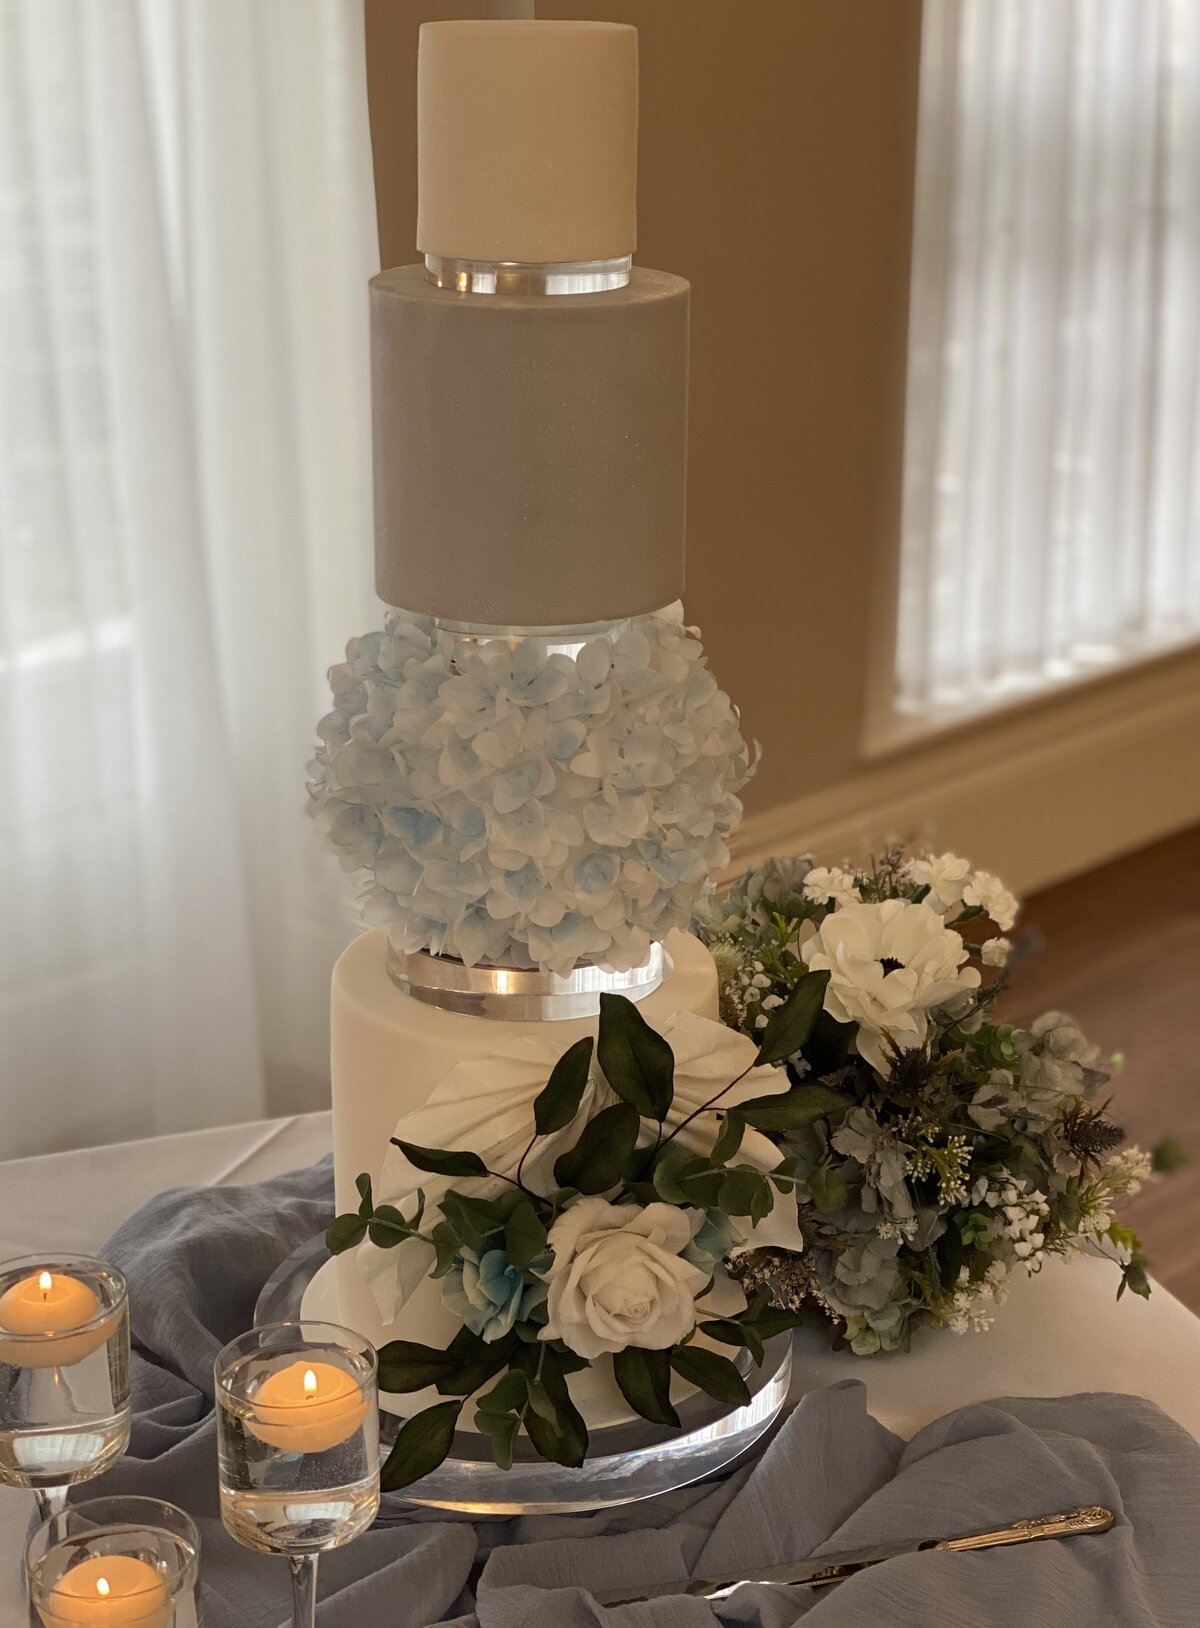 Blue and white wedding cake with wafer paper ball and sugar flowers